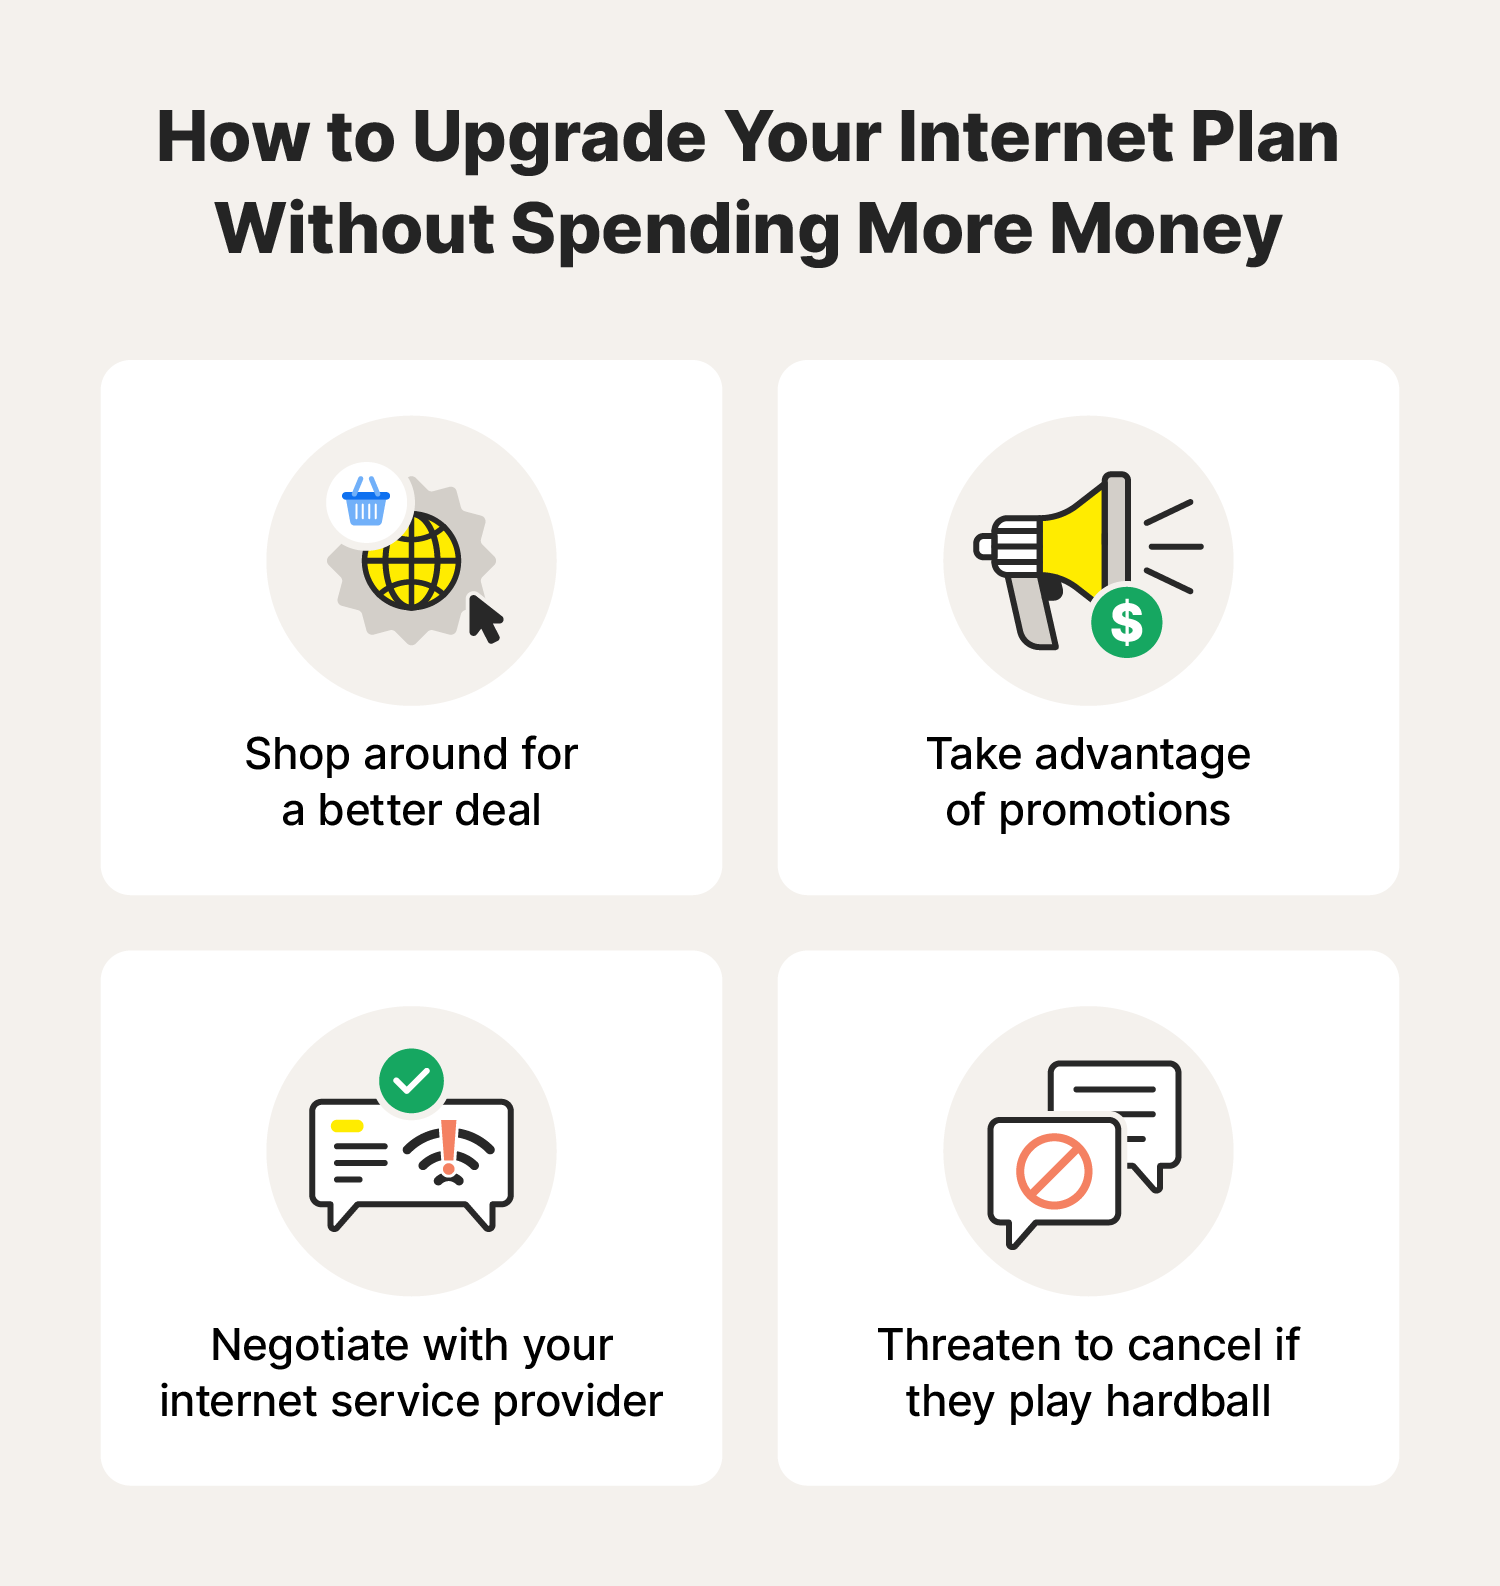 An image with tips on how to upgrade your internet without breaking the bank.